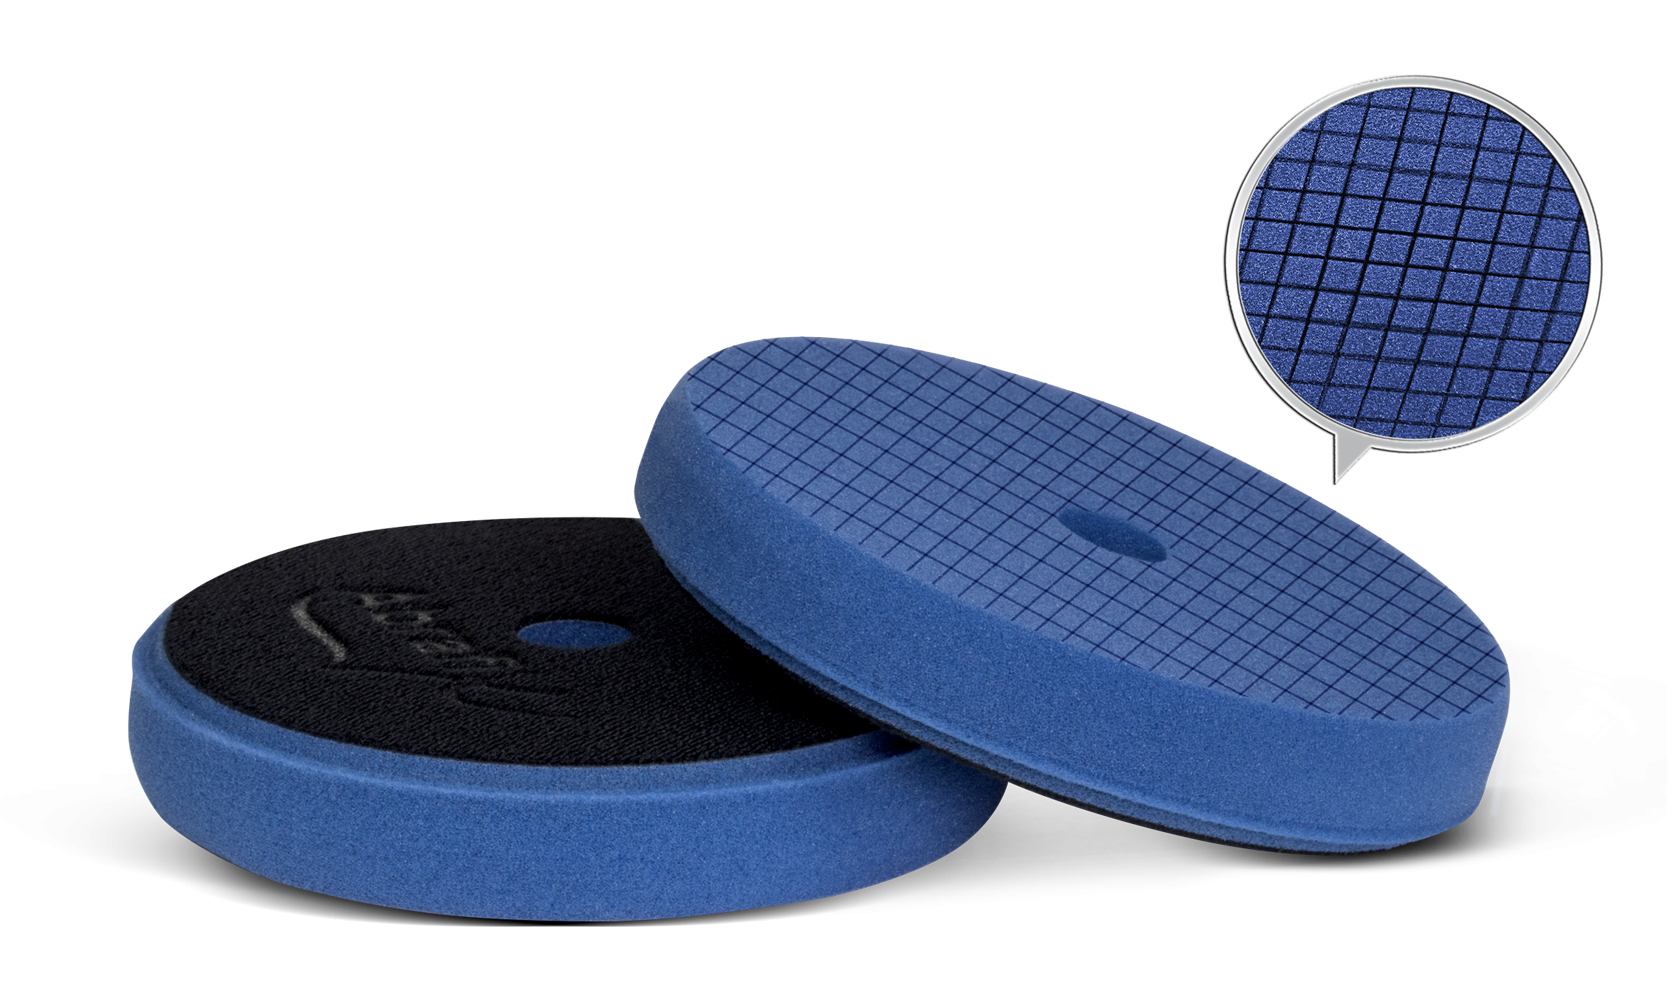 SCHOLL CONCEPTS SpiderPad navy-blue S 90/25 mm